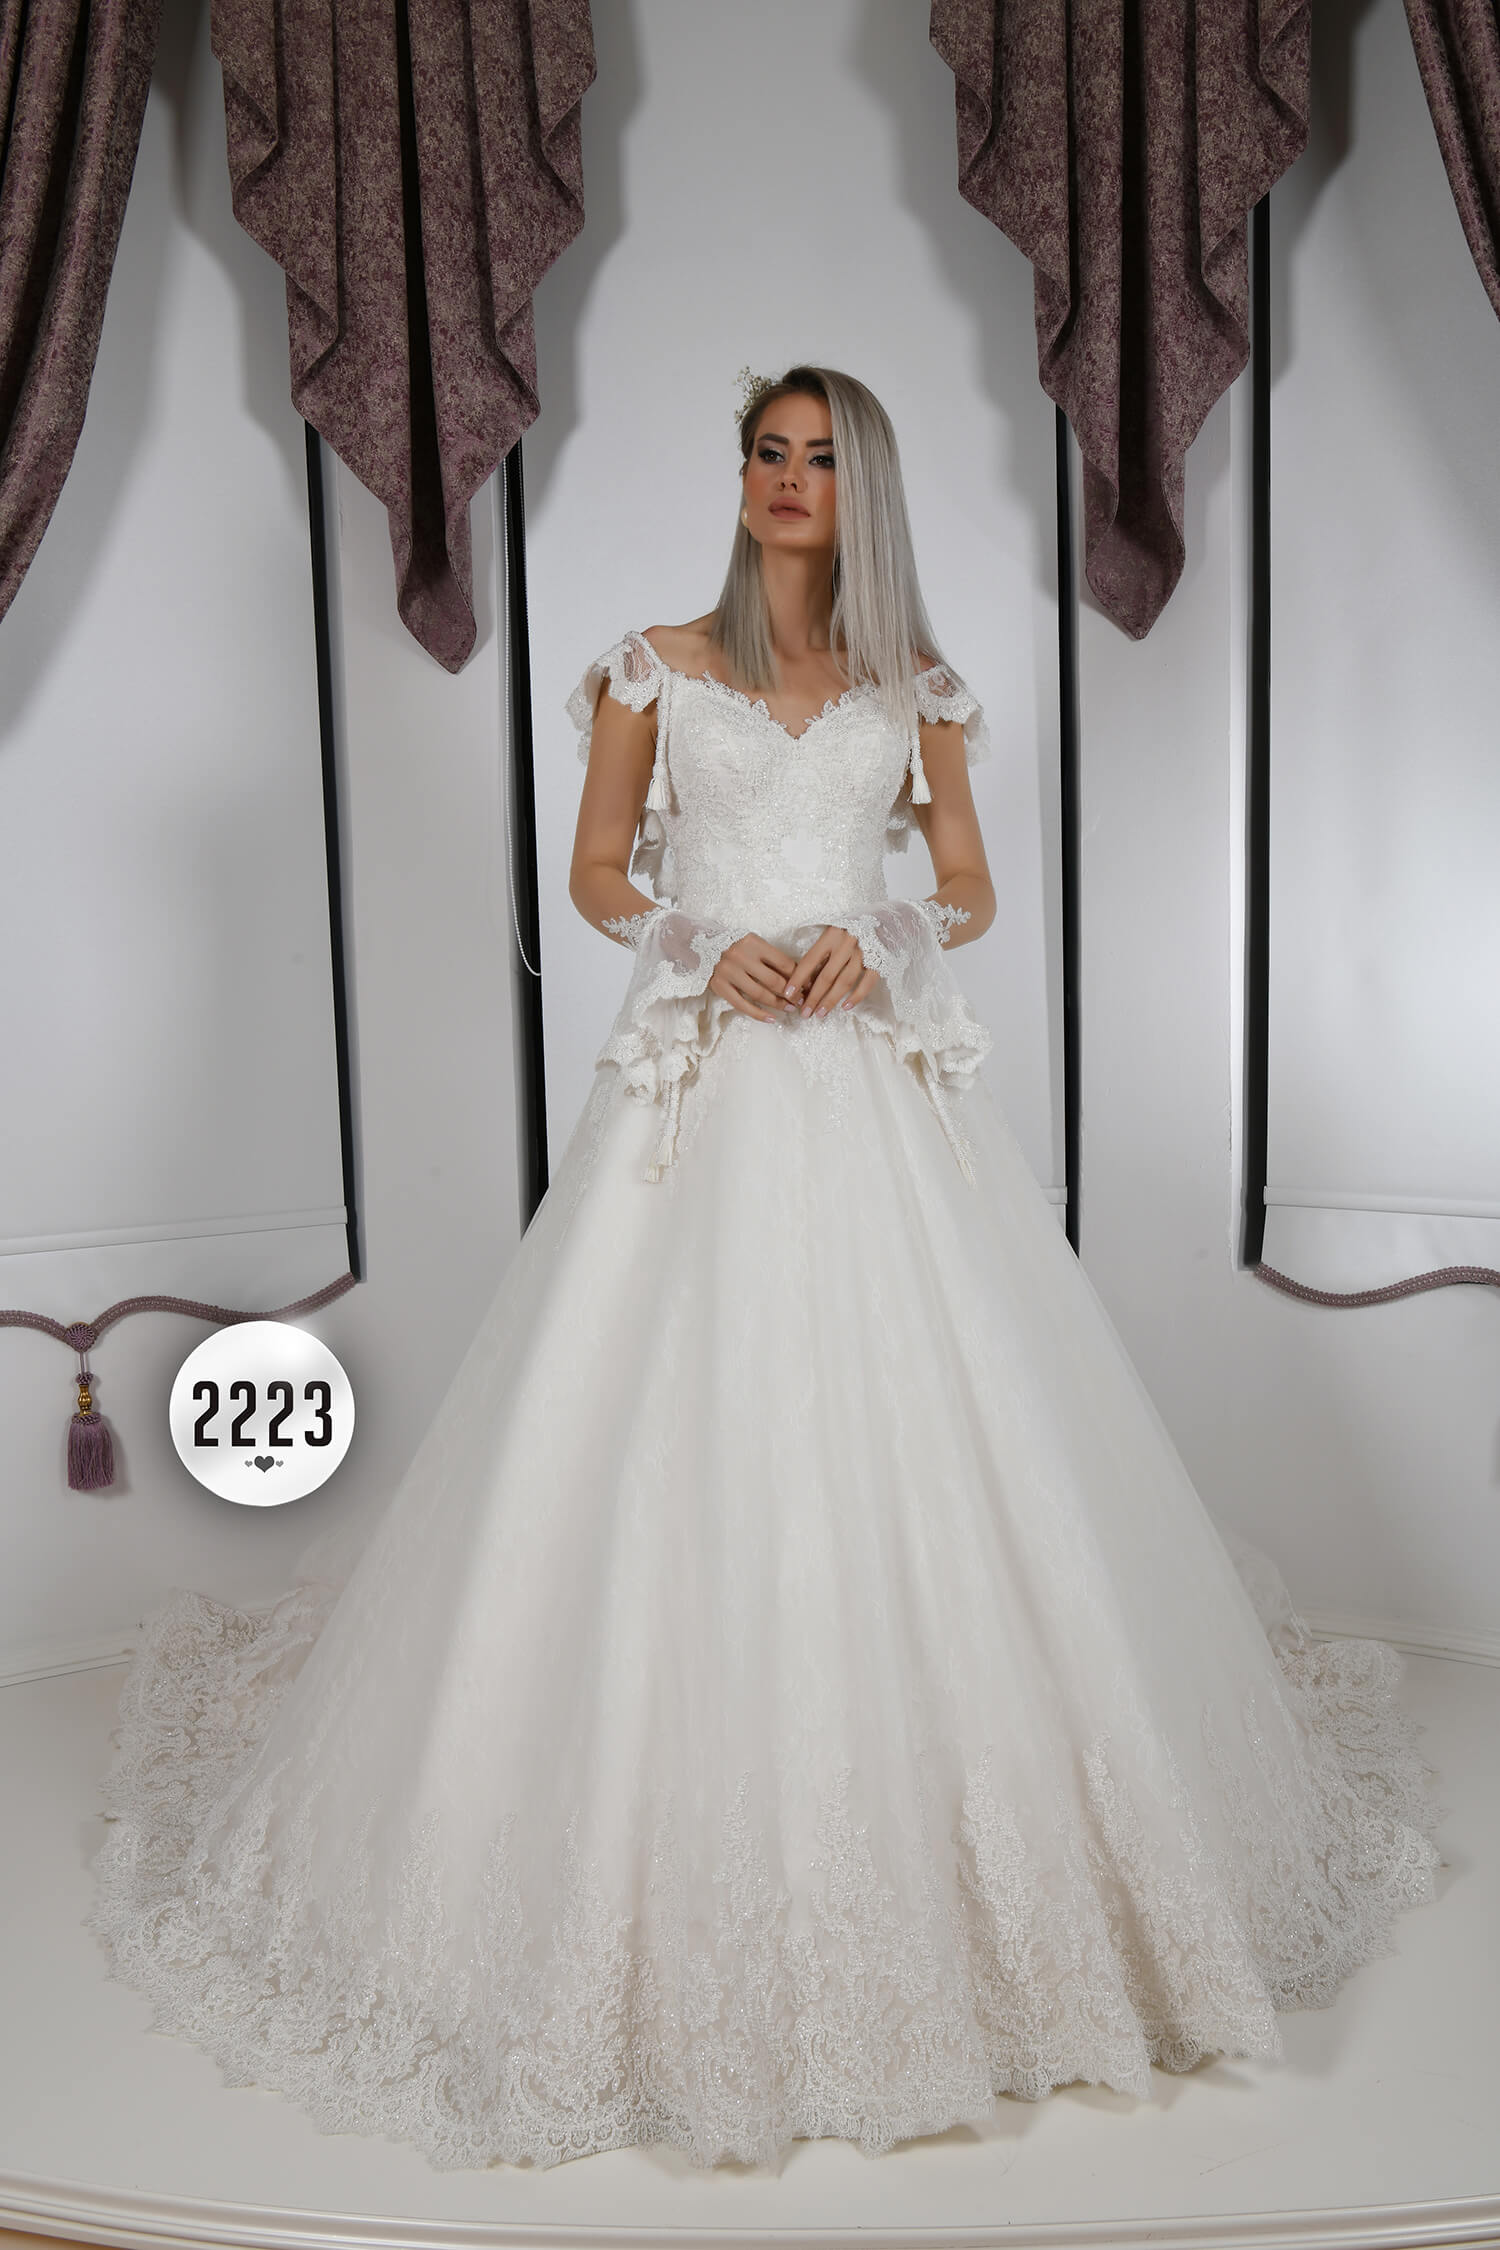 Strapless Neckline Helen Wedding Dress with Silver and Crystal Inlaid Sleeve